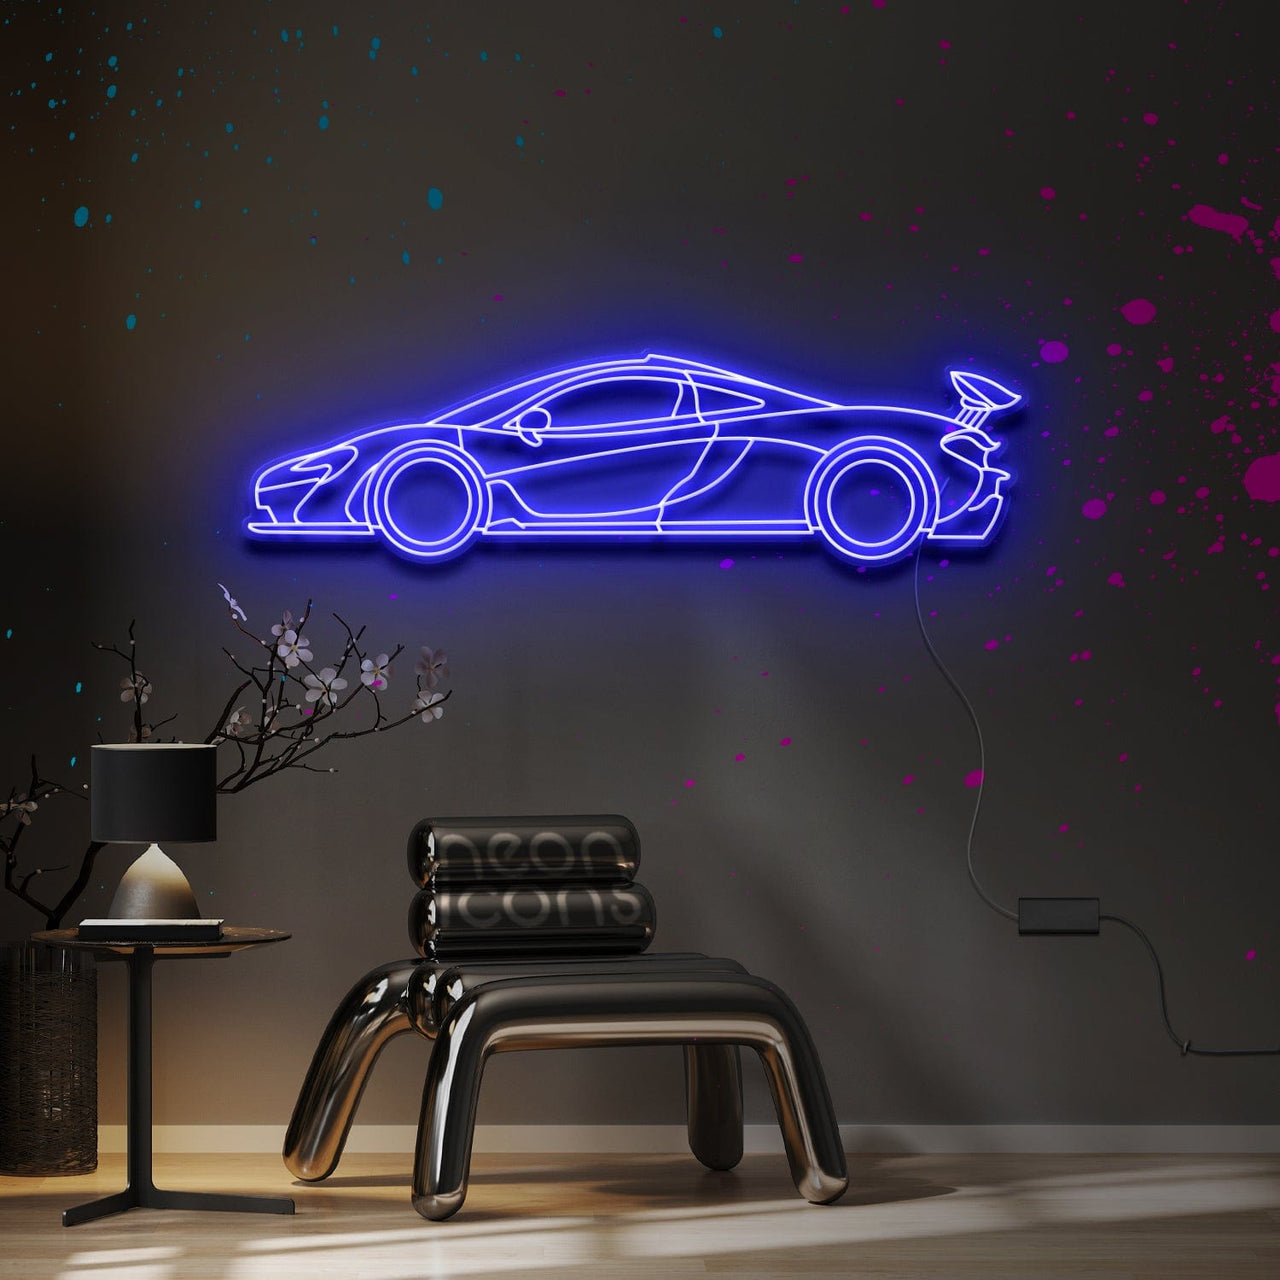 "McLaren P1" Neon Sign 4ft x 1.2ft / Blue / LED Neon by Neon Icons